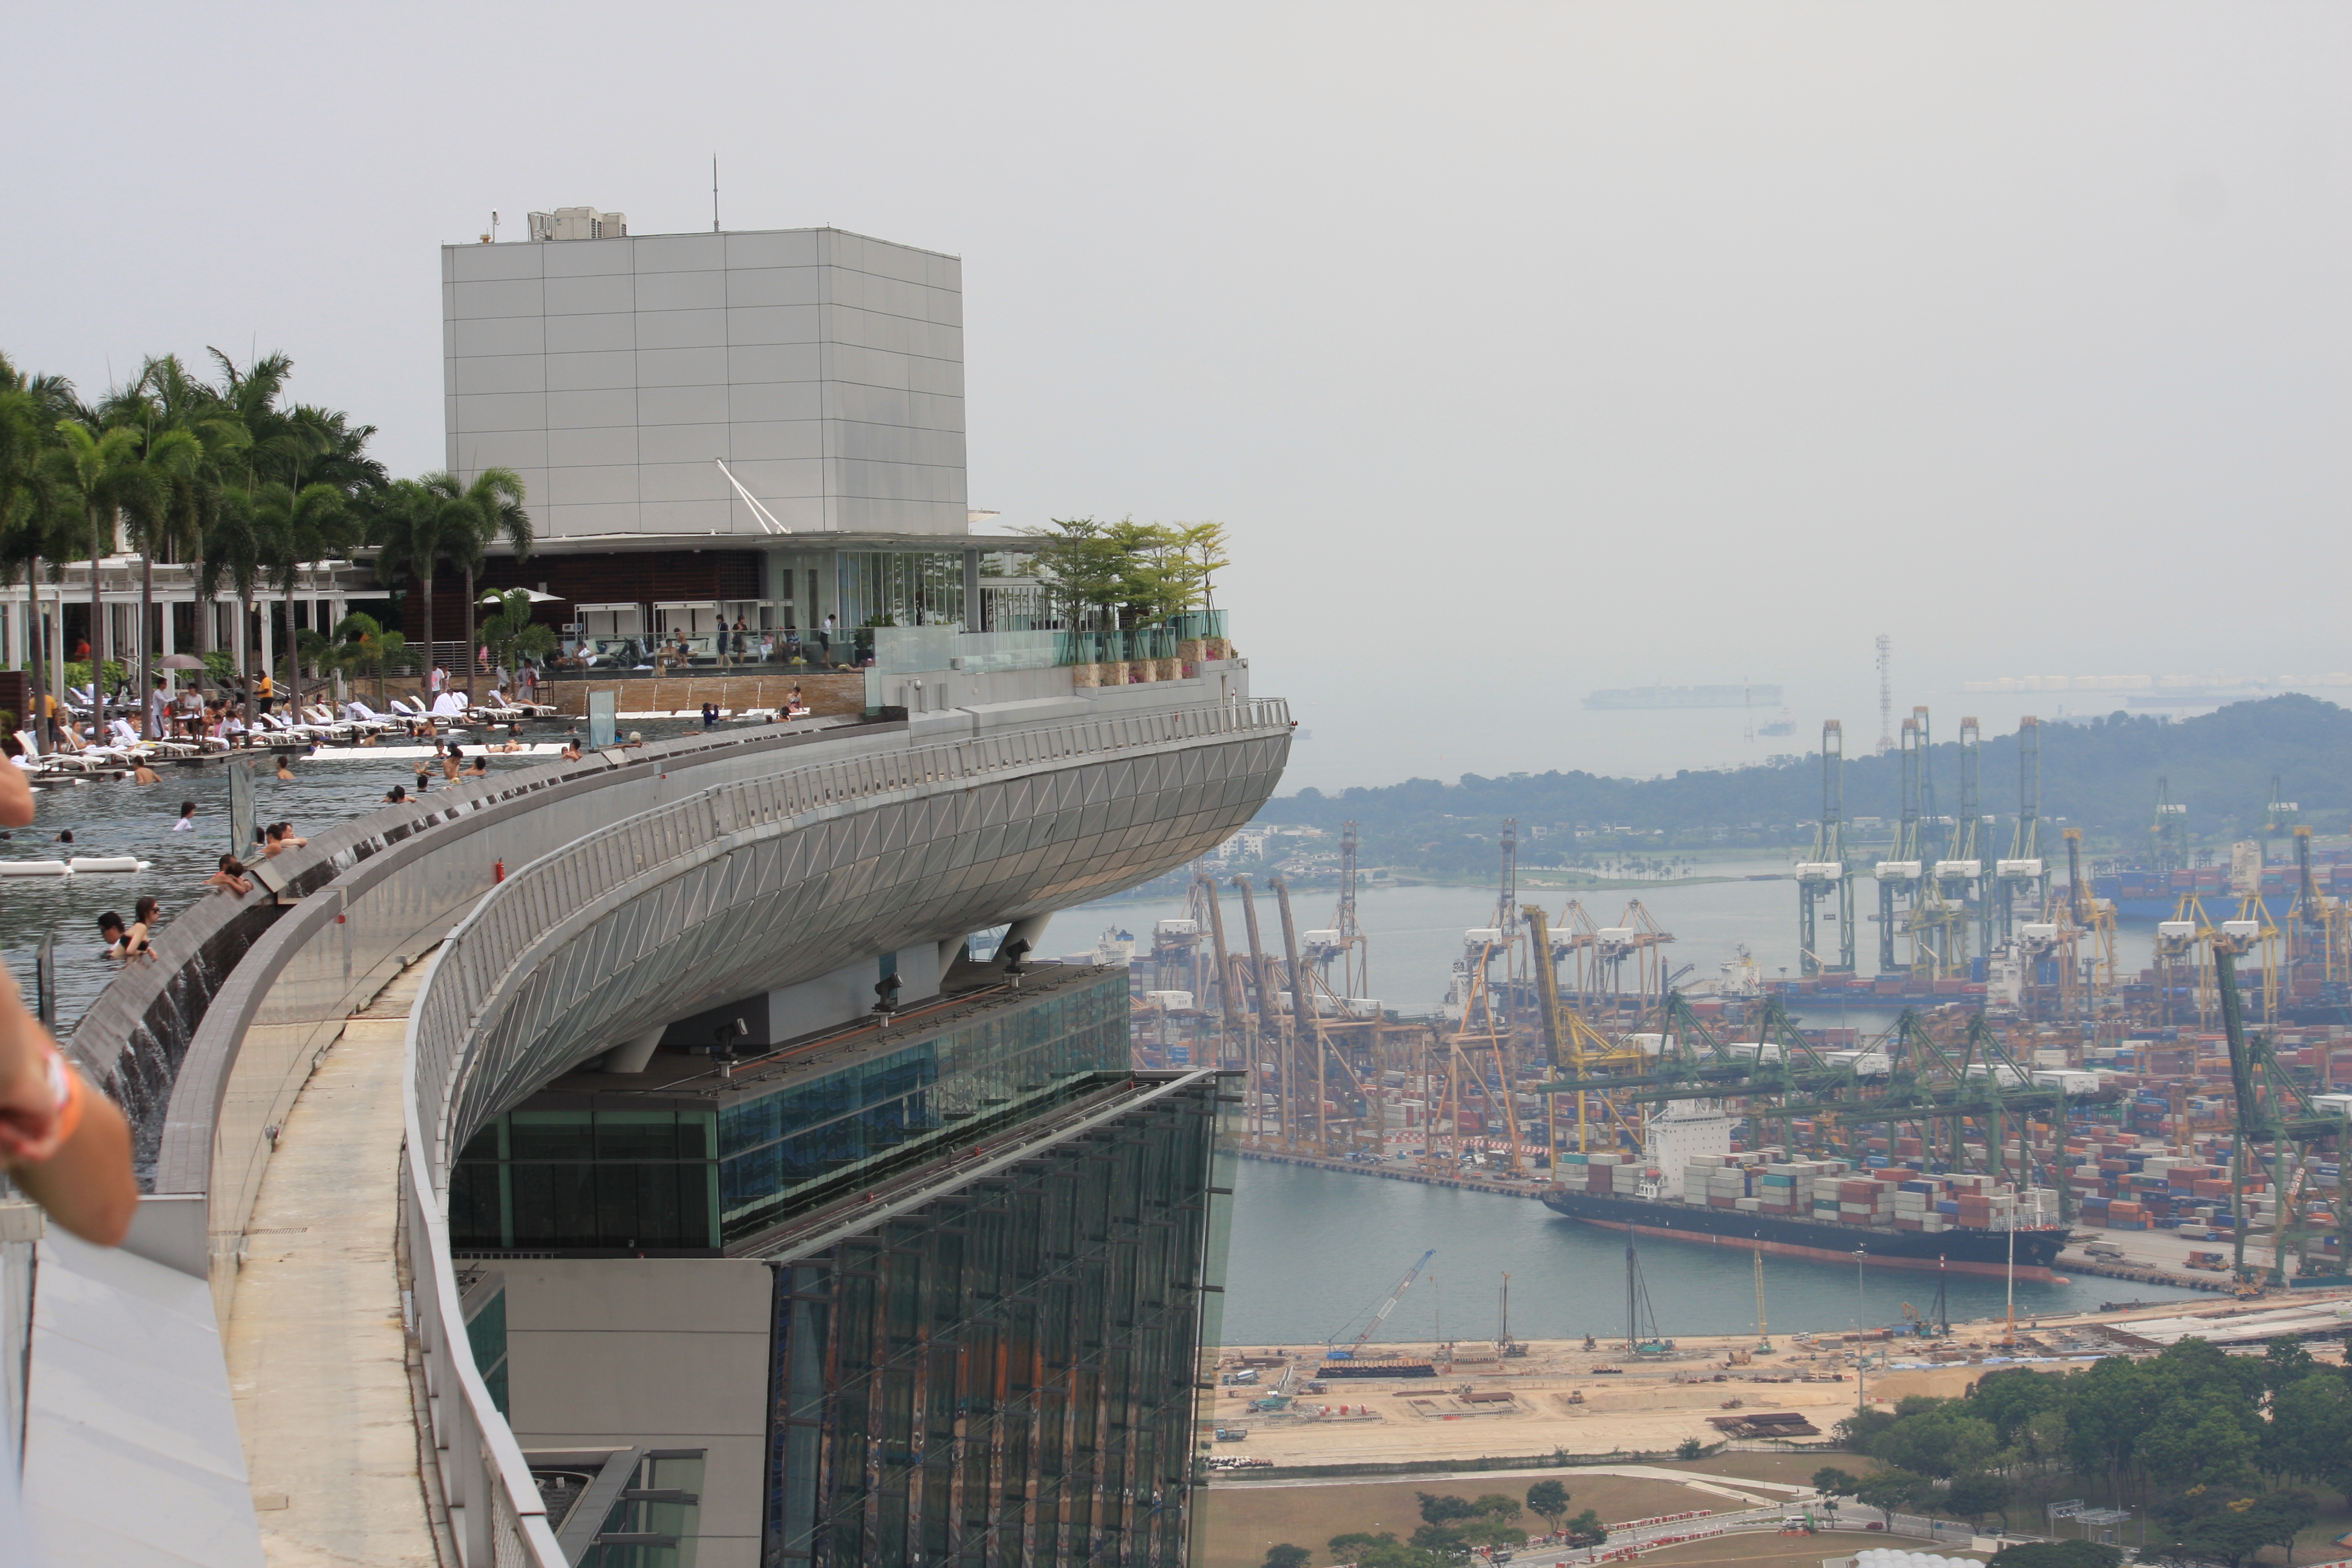 File:Marina Bay Sands Hotel, Singapore, view from the top. (8328604359).jpg - Wikimedia Commons